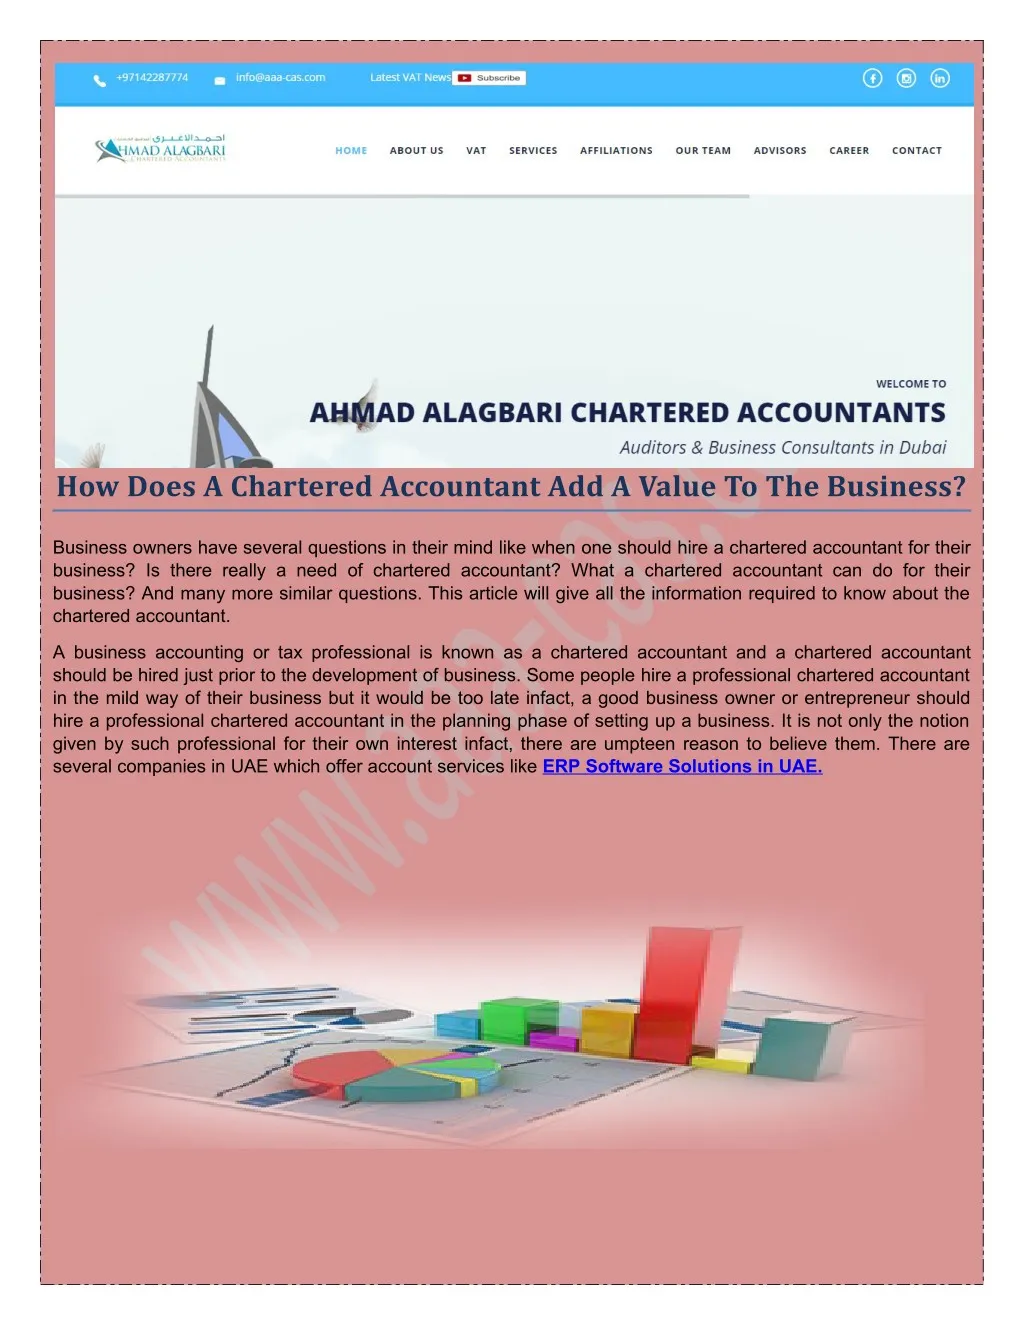 how does a chartered accountant add a value